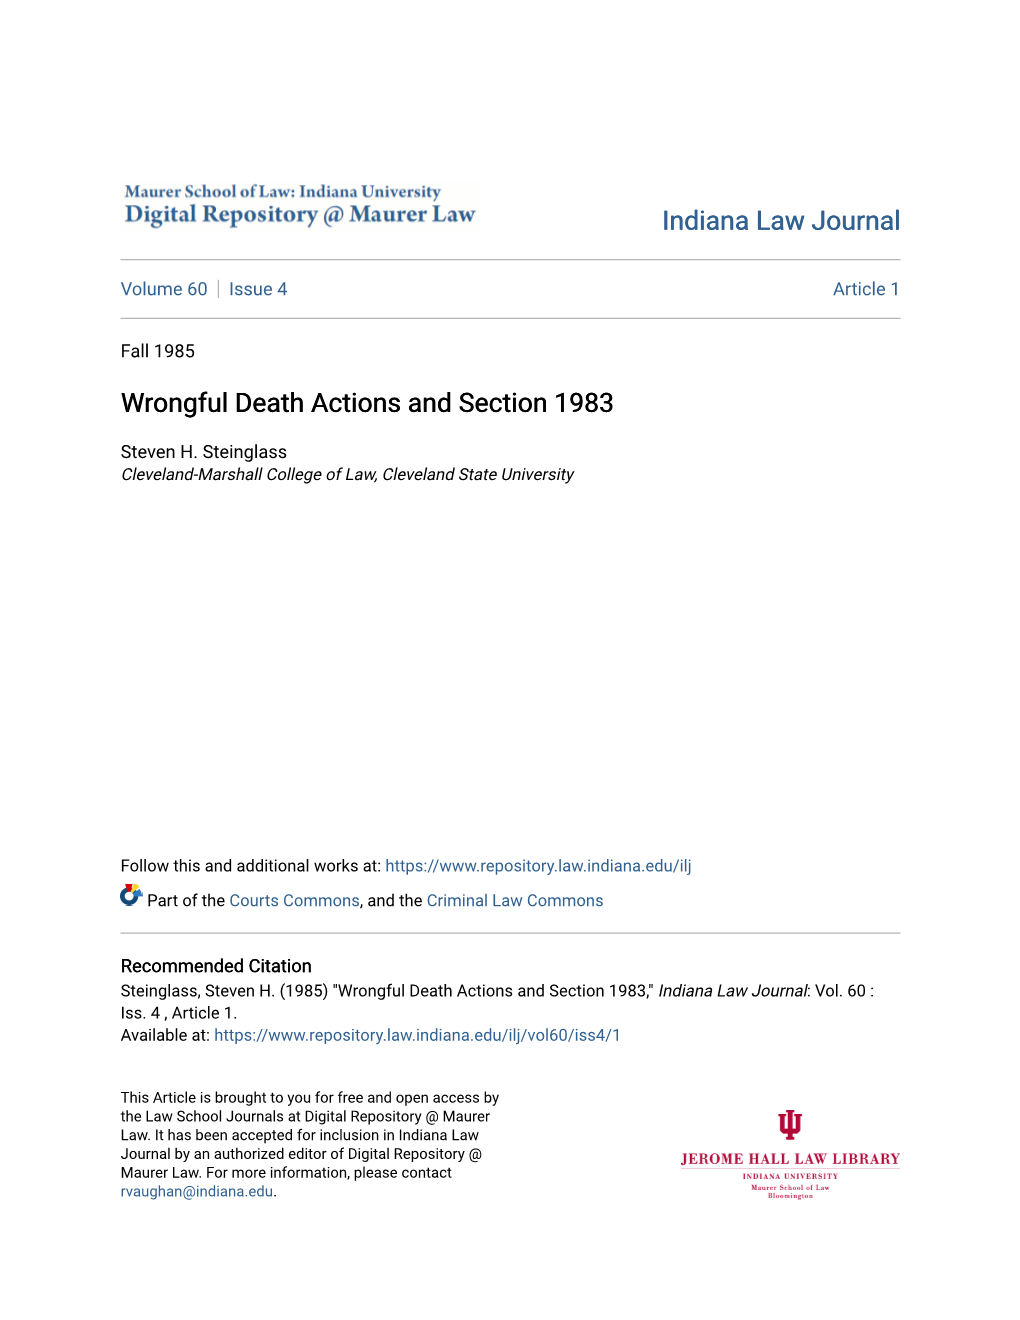 Wrongful Death Actions and Section 1983